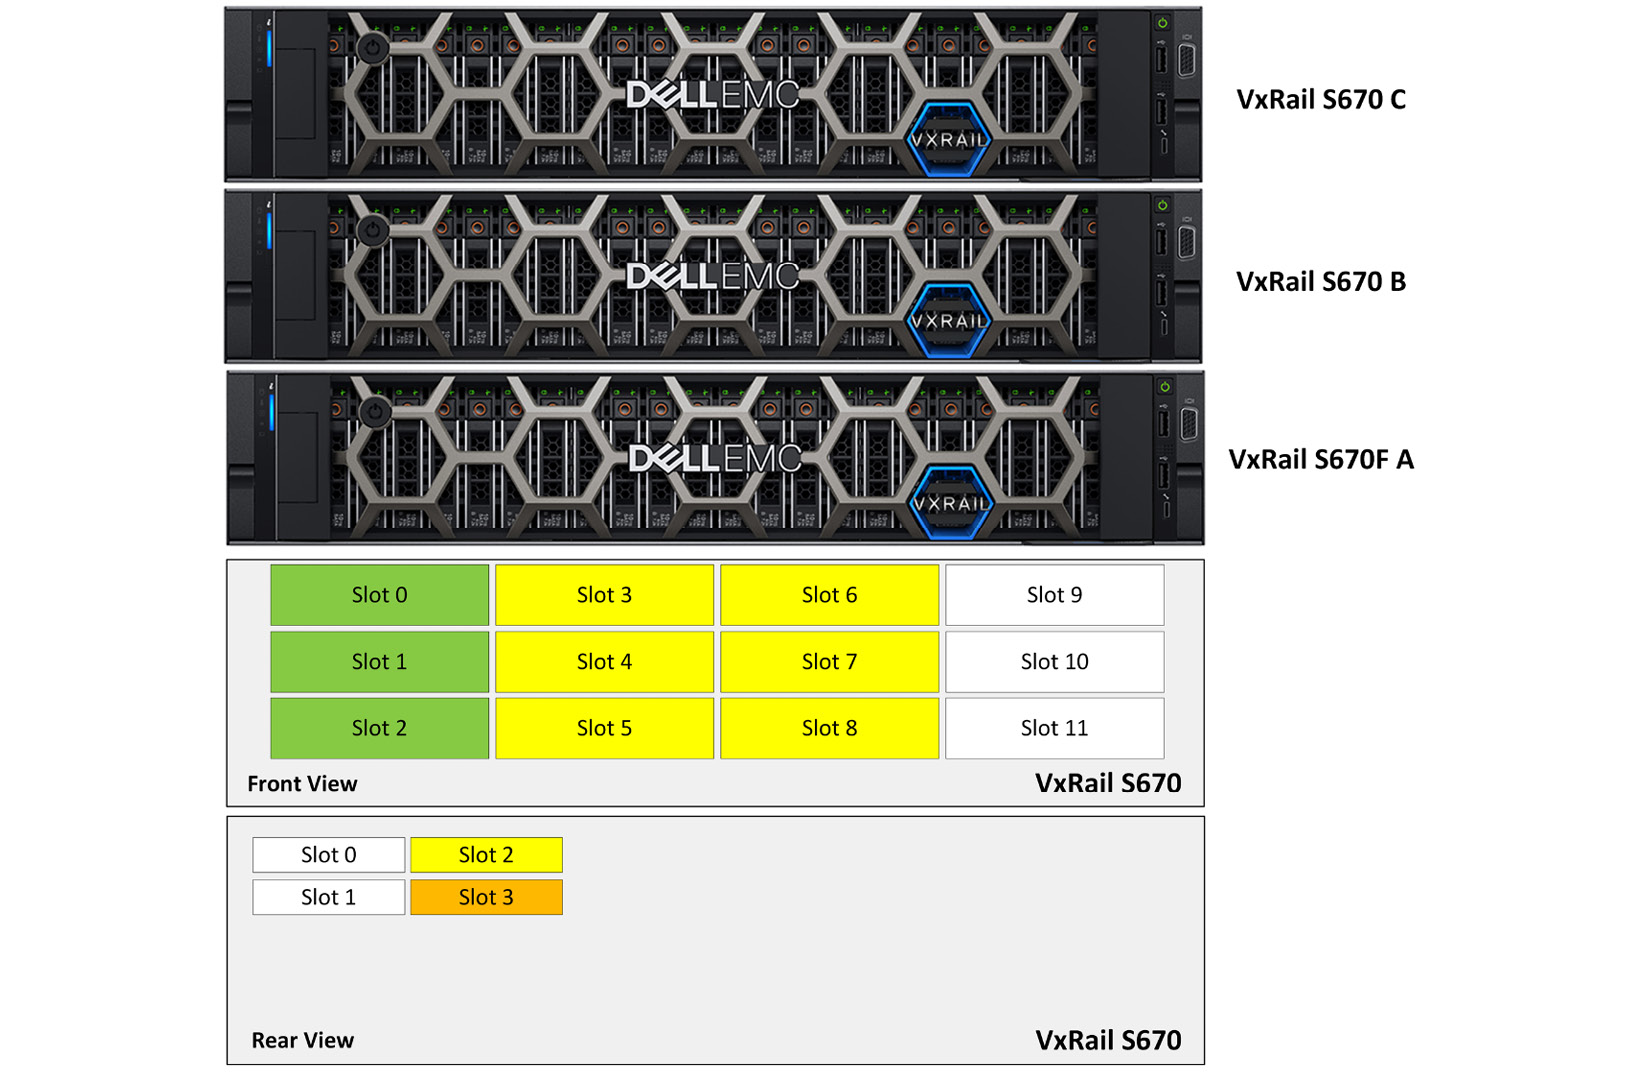 Figure 5.20 – Unsupported disk group configuration in VxRail S670
